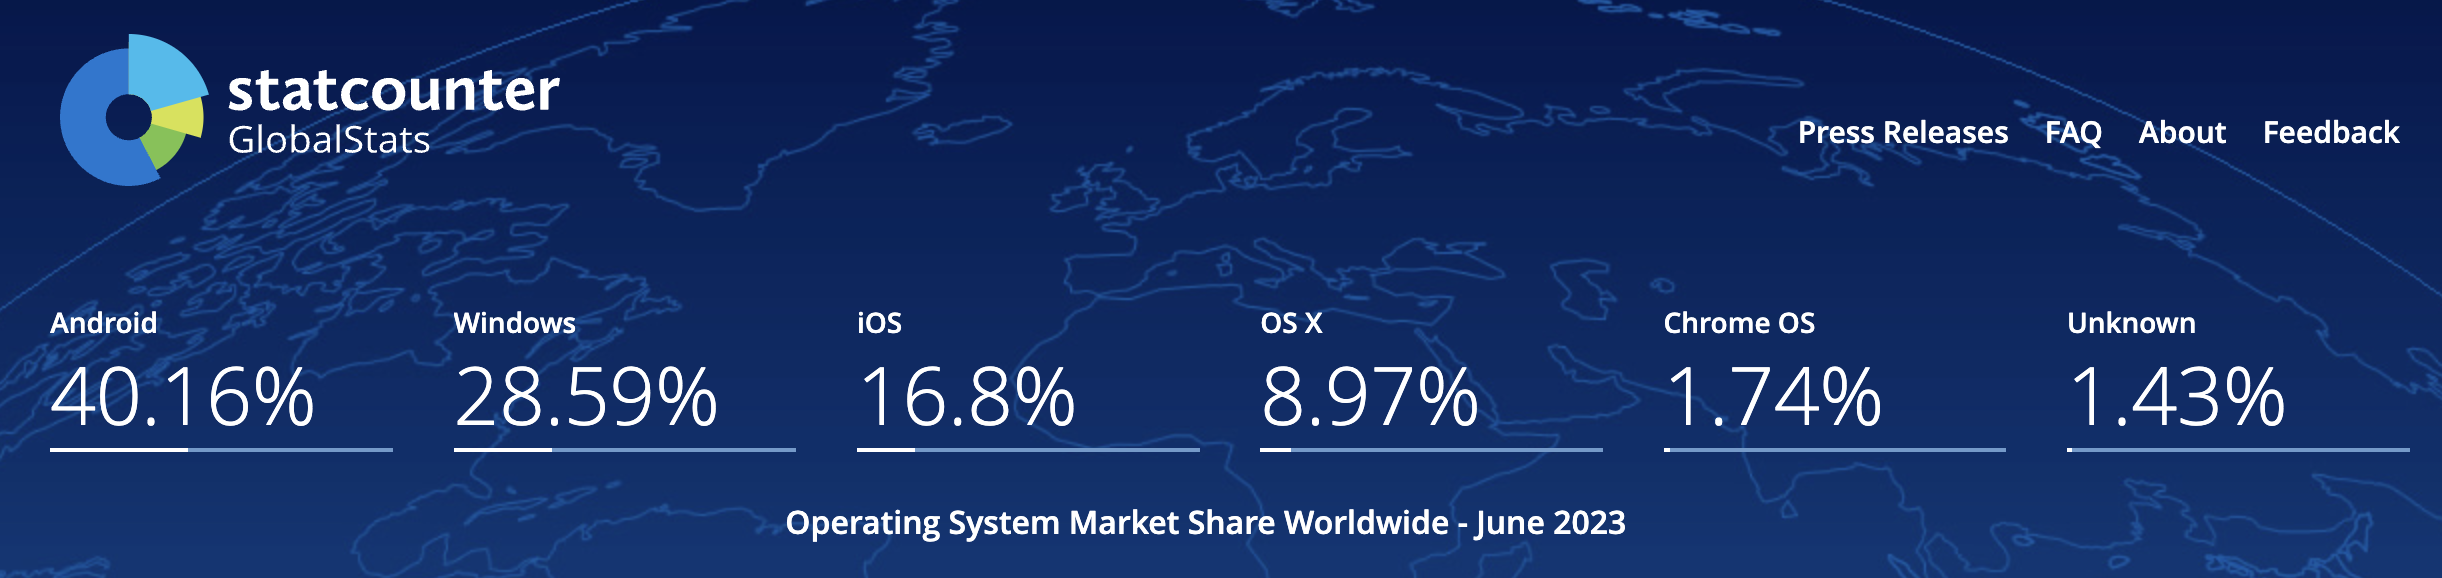 OS Market Share across all devices and platforms